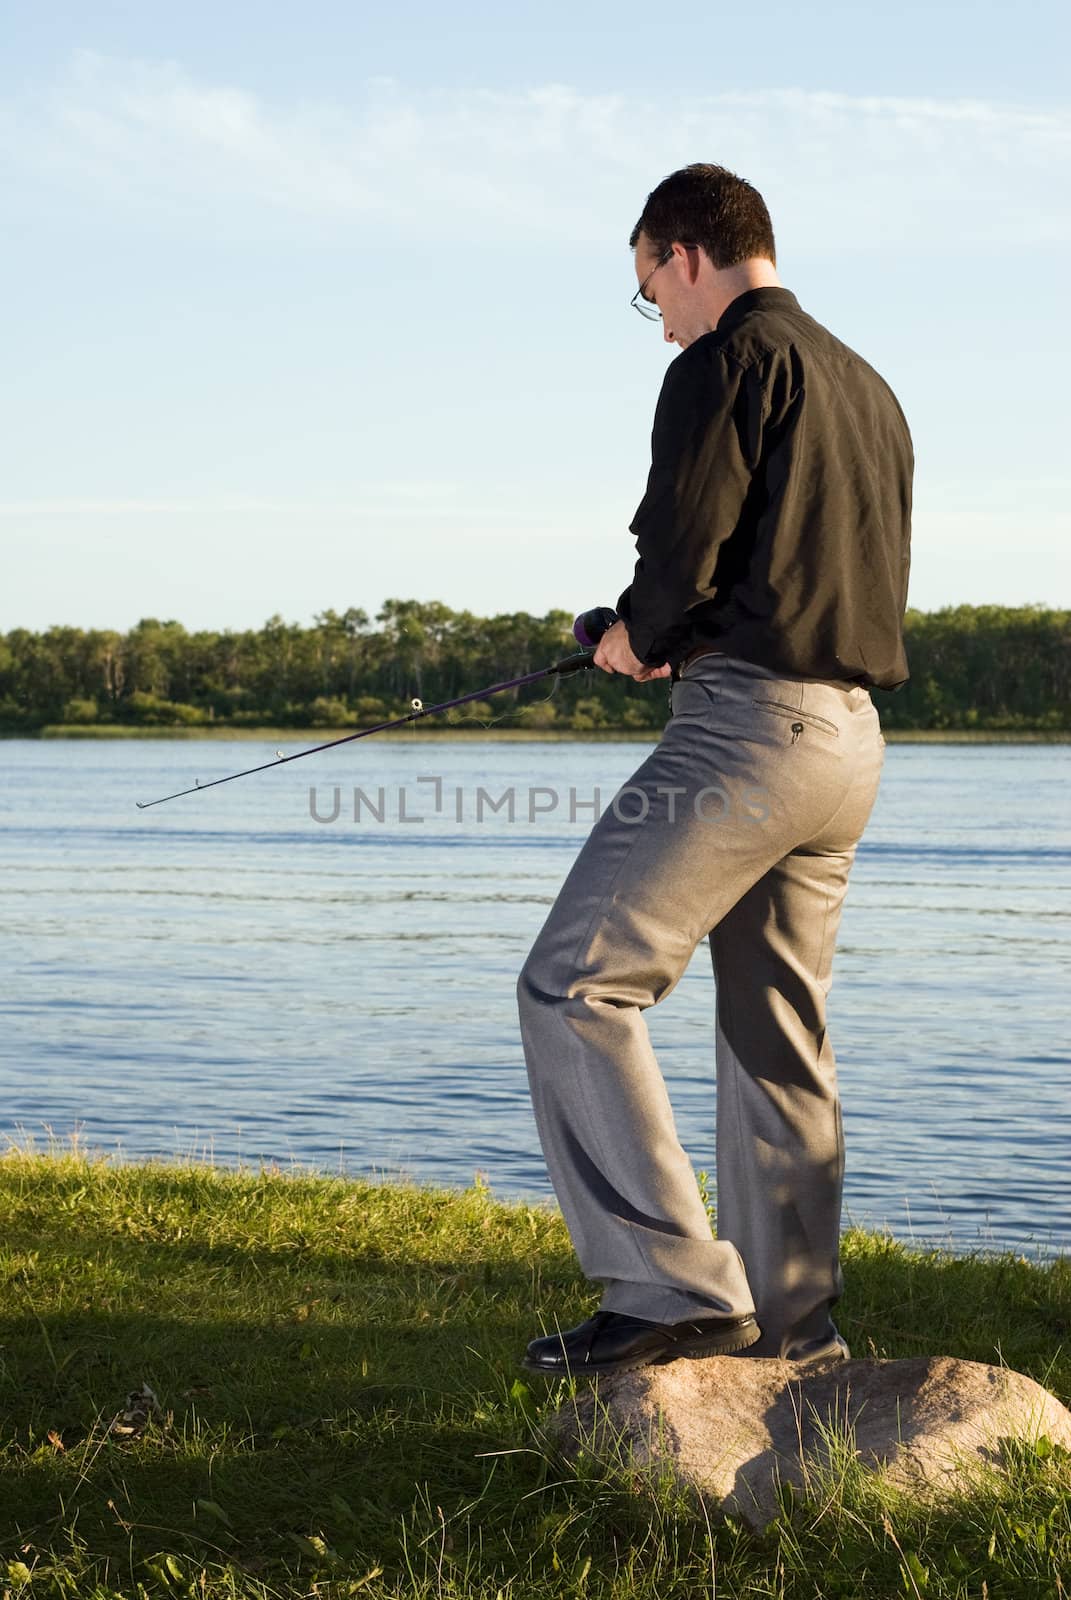 A young man wearing a suit, going fishing in a small lake